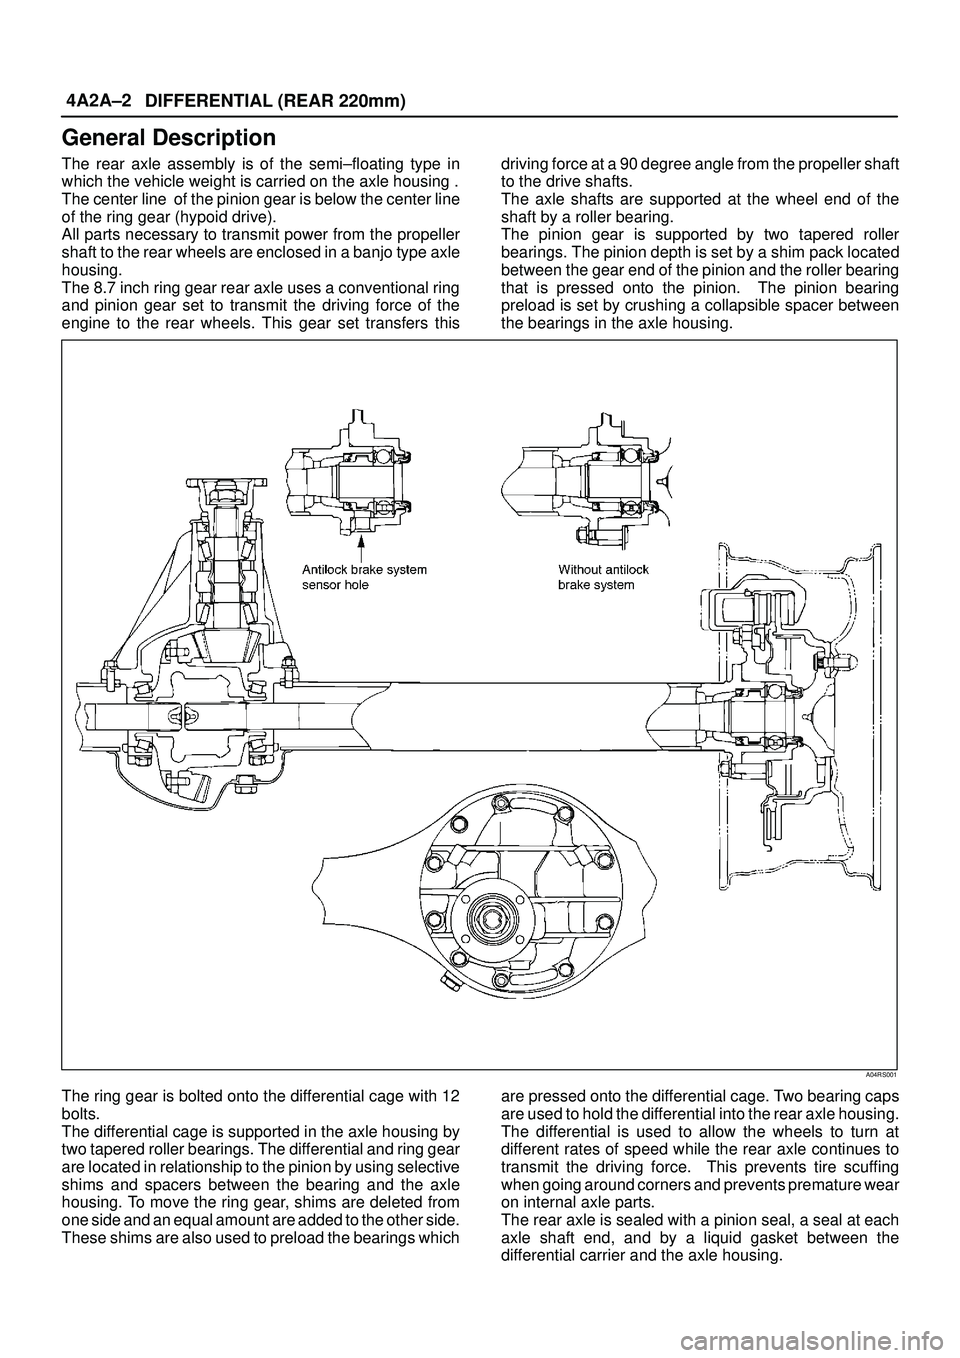 ISUZU TROOPER 1998  Service Repair Manual 4A2A±2
DIFFERENTIAL (REAR 220mm)
General Description
The rear axle assembly is of the semi±floating type in
which the vehicle weight is carried on the axle housing .
The center line  of the pinion g